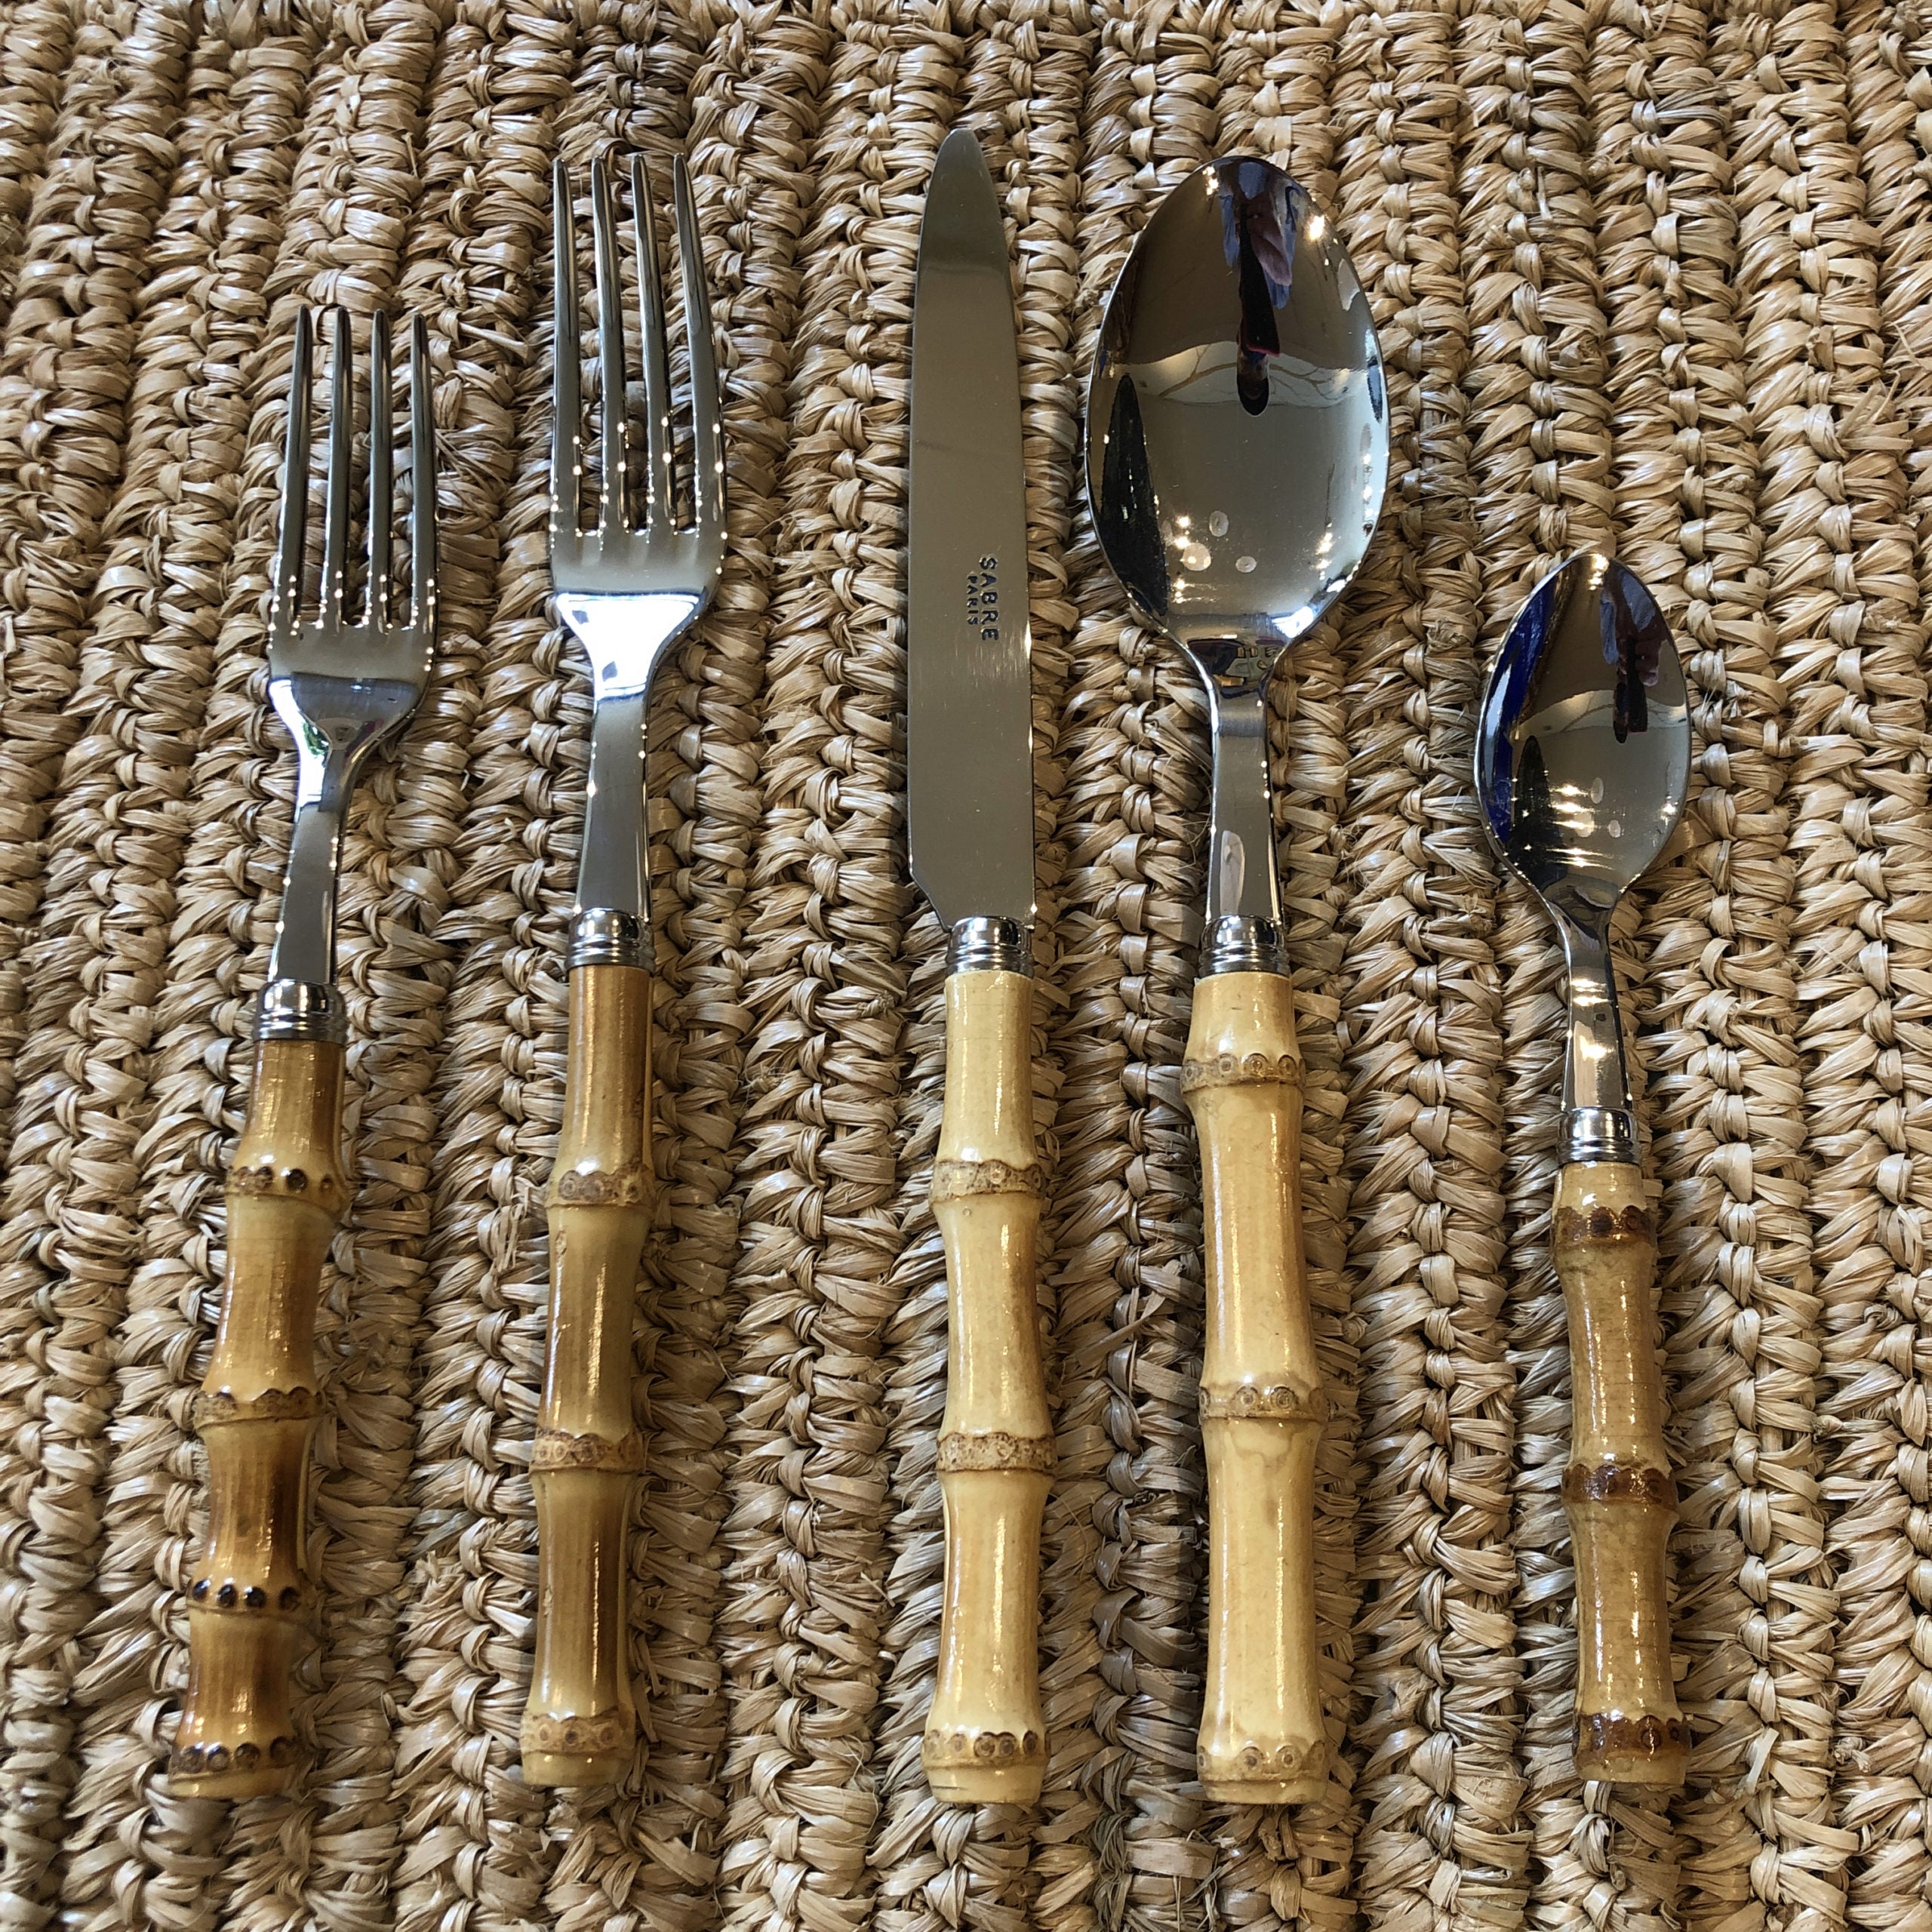 Vintage Brass Bamboo Style Flatware. 93 Piece Brass Bamboo Cutlery Set.  Retro Brass Bamboo Style Flatware. SALE! FREE SHIPPING!